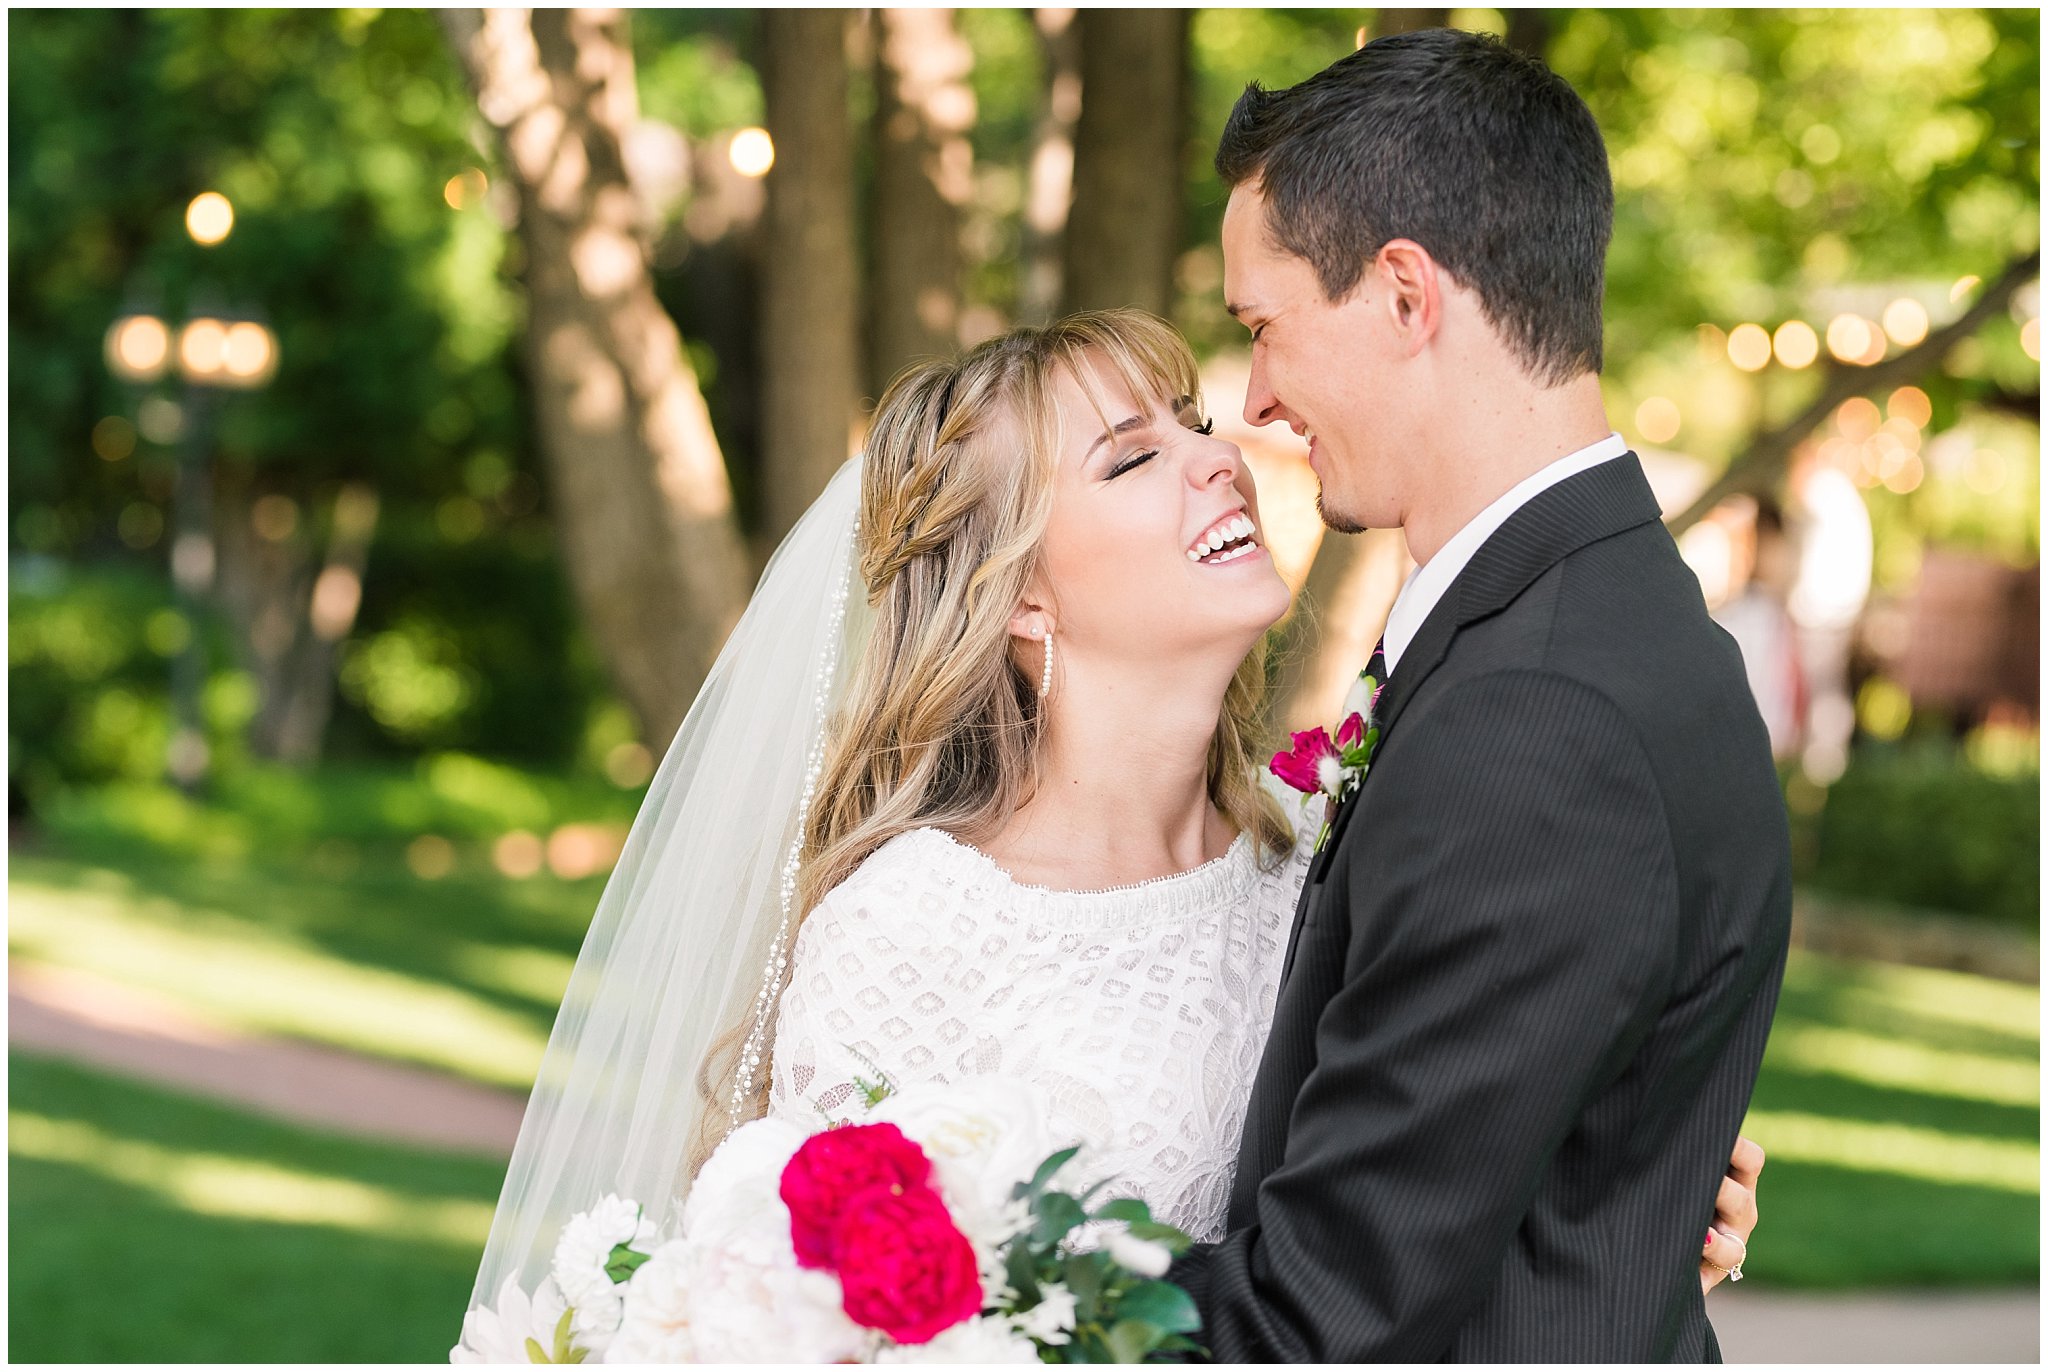 Bride and groom portraits candid moments laughing | white and deep pink florals with black suit and lace dress | Wadley Farms Summer Wedding | Jessie and Dallin Photography